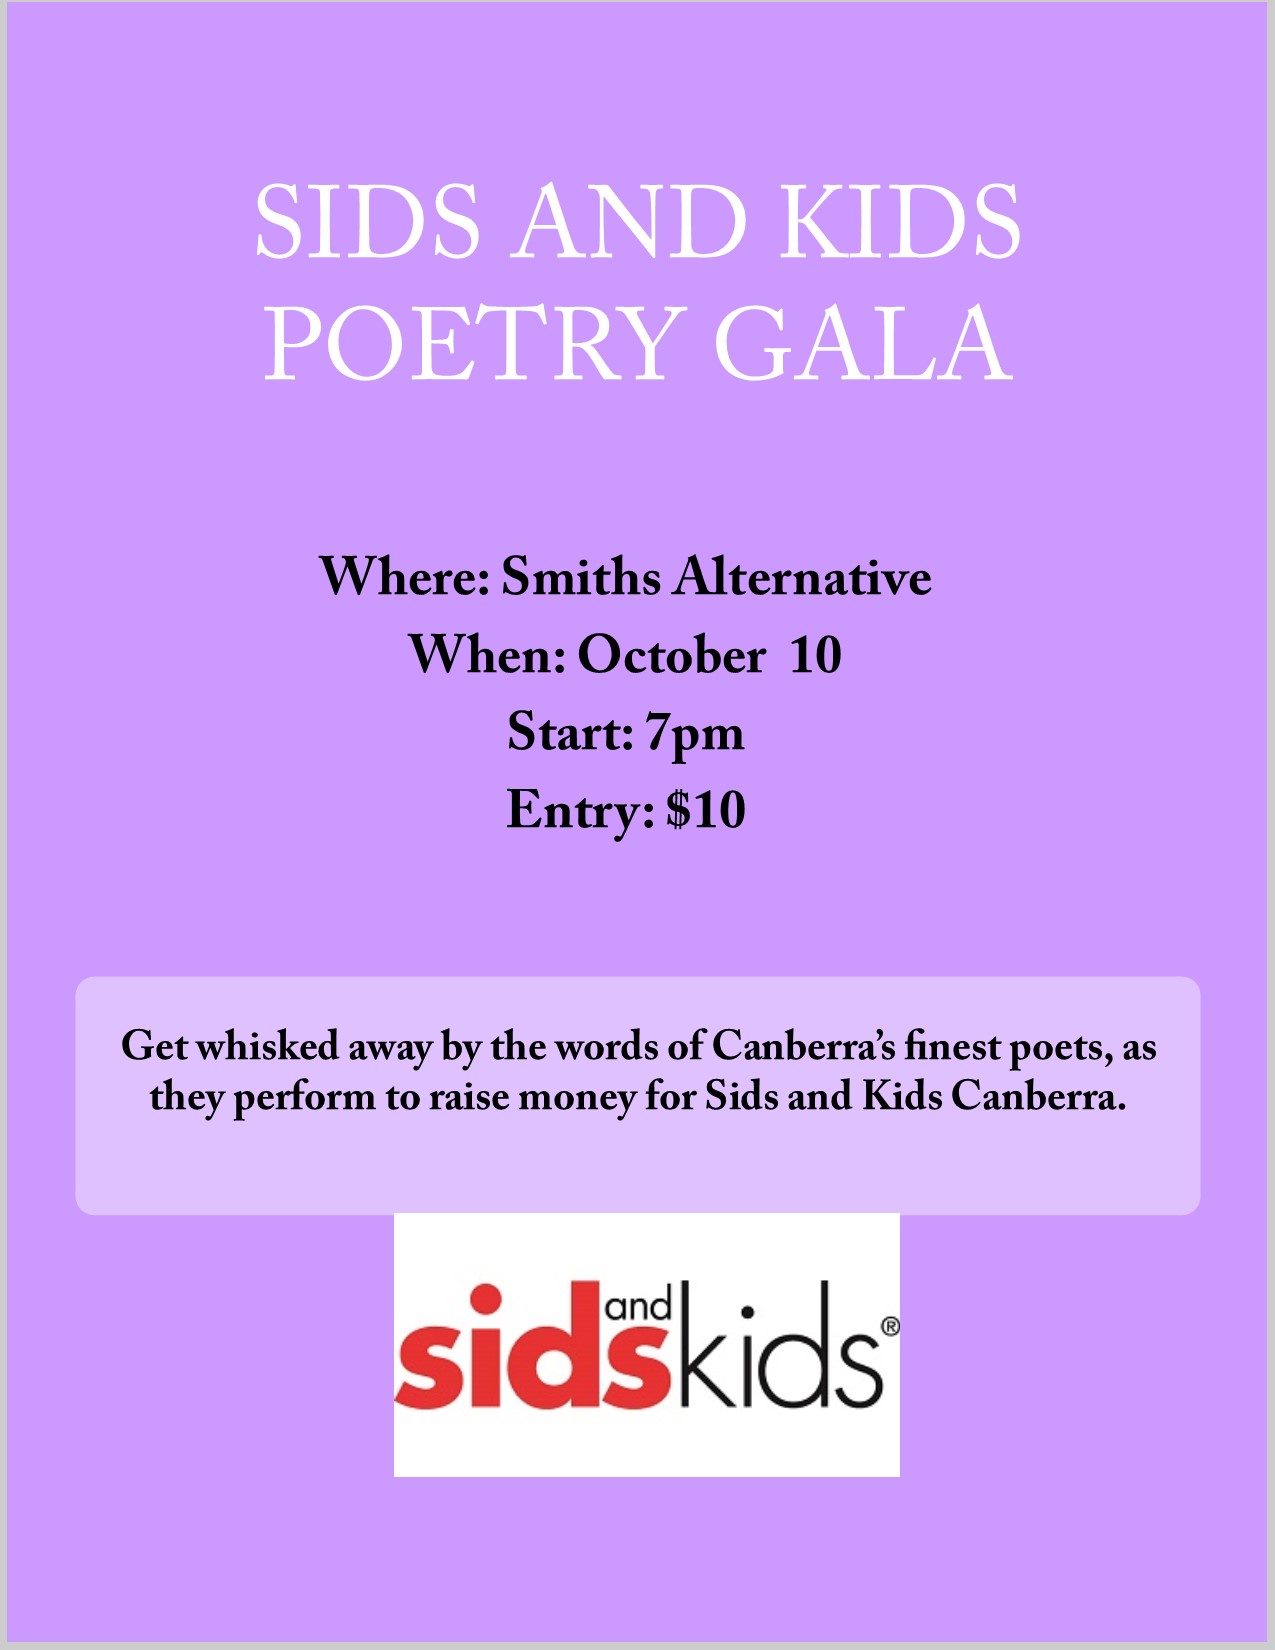 Sids and Kids Poetry Gala